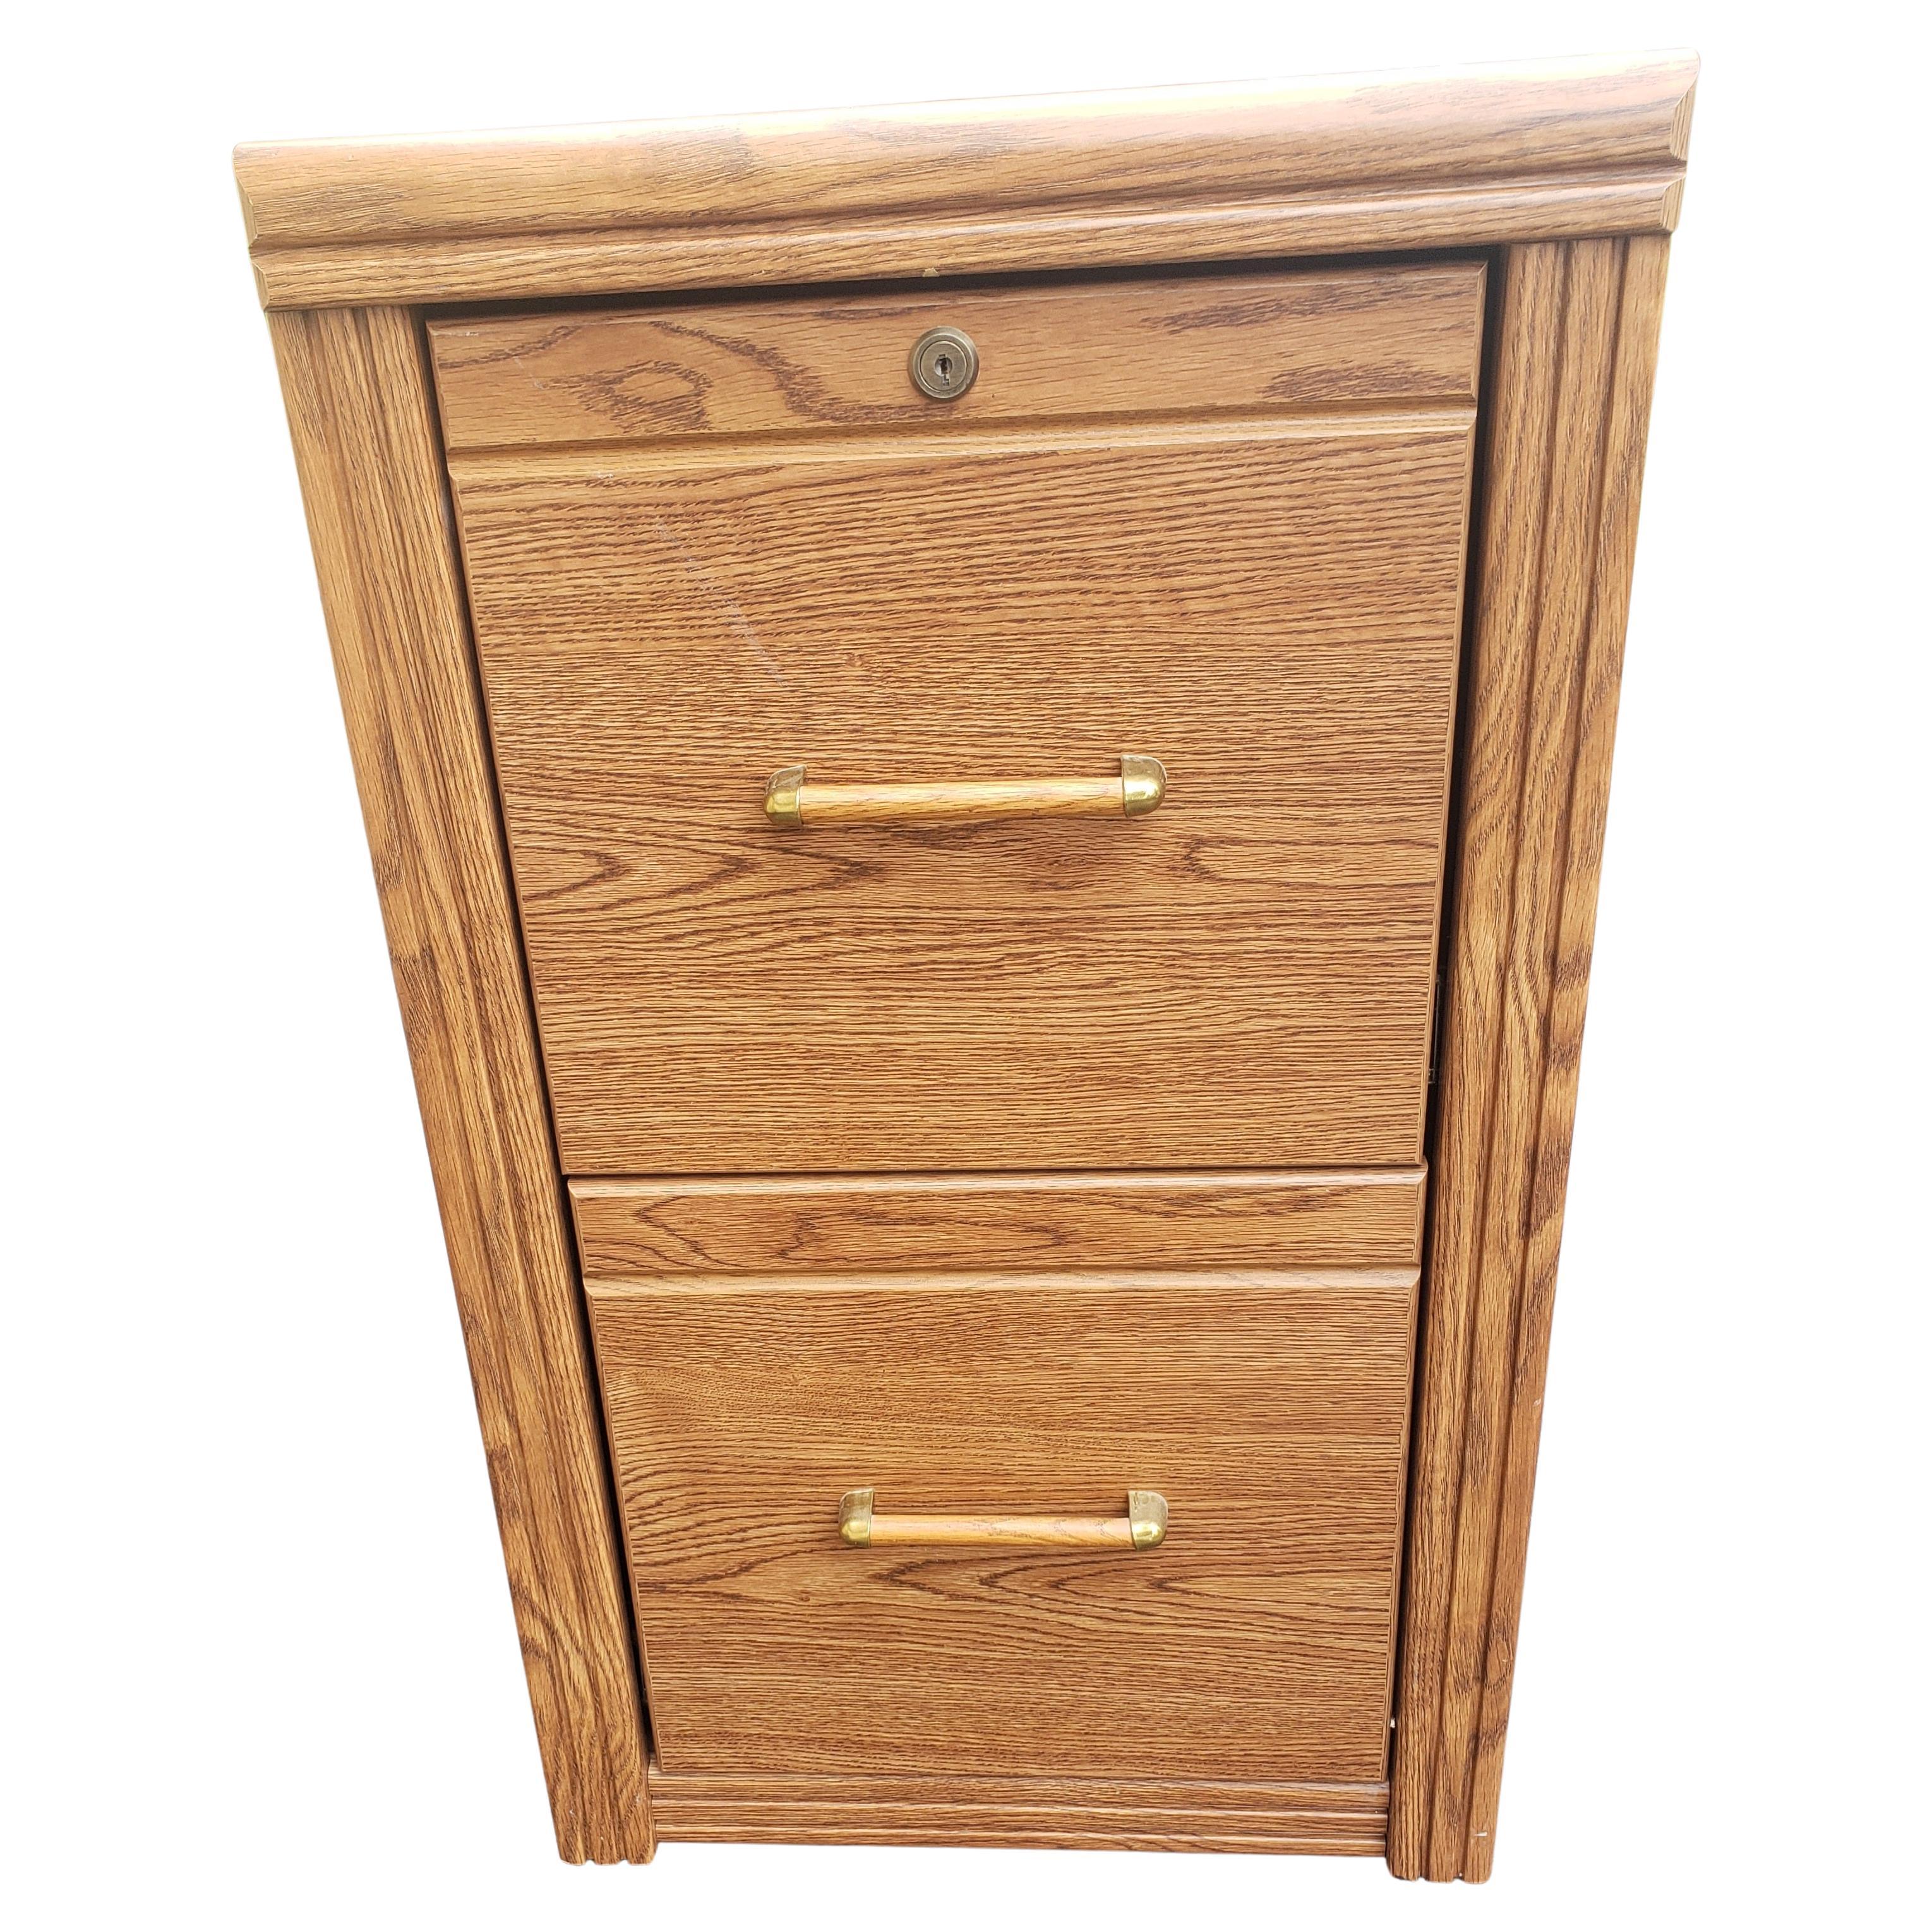 Two-Drawer Locking Filing Cabinet with Build-In Hanging File Folder Rails In Good Condition For Sale In Germantown, MD